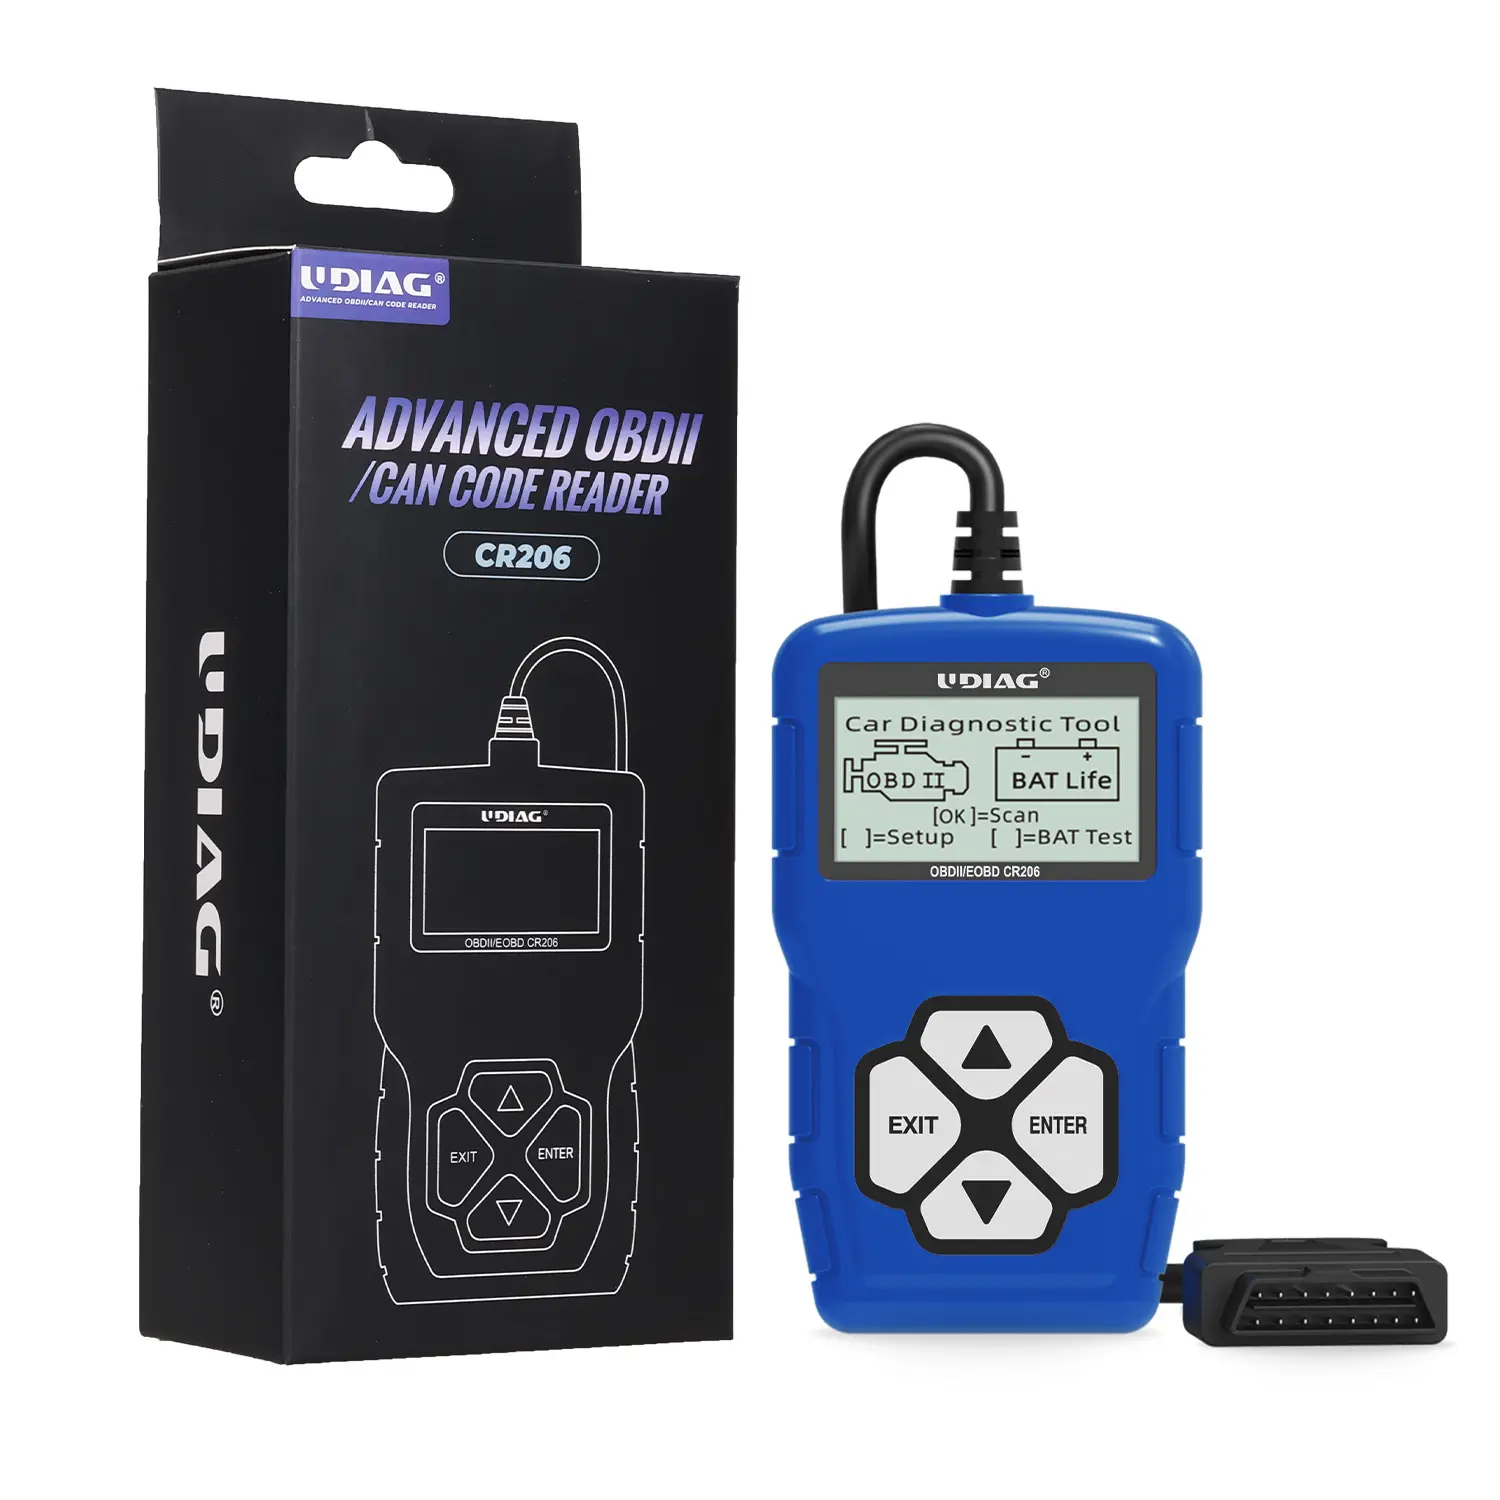 CR206 Automotive Full Function Code Reader Auto Diagnose For Most Of Models Key Programming And Dashboard Recovery Tool